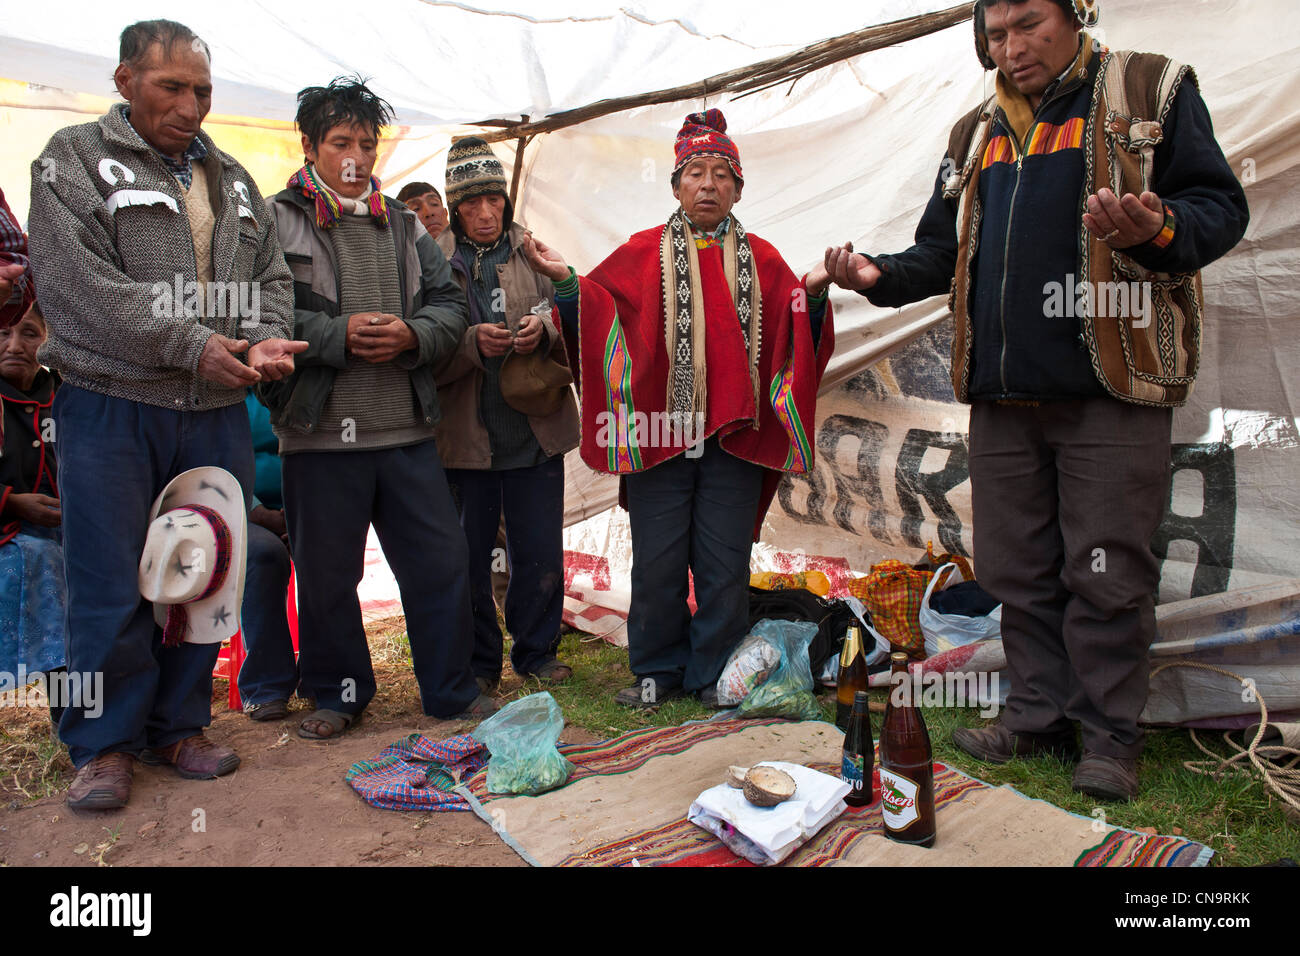 Peru, Cuzco province, Huasao, listed as mystic touristic village, shamans (curanderos), ceremonial offerings dedicated to Stock Photo